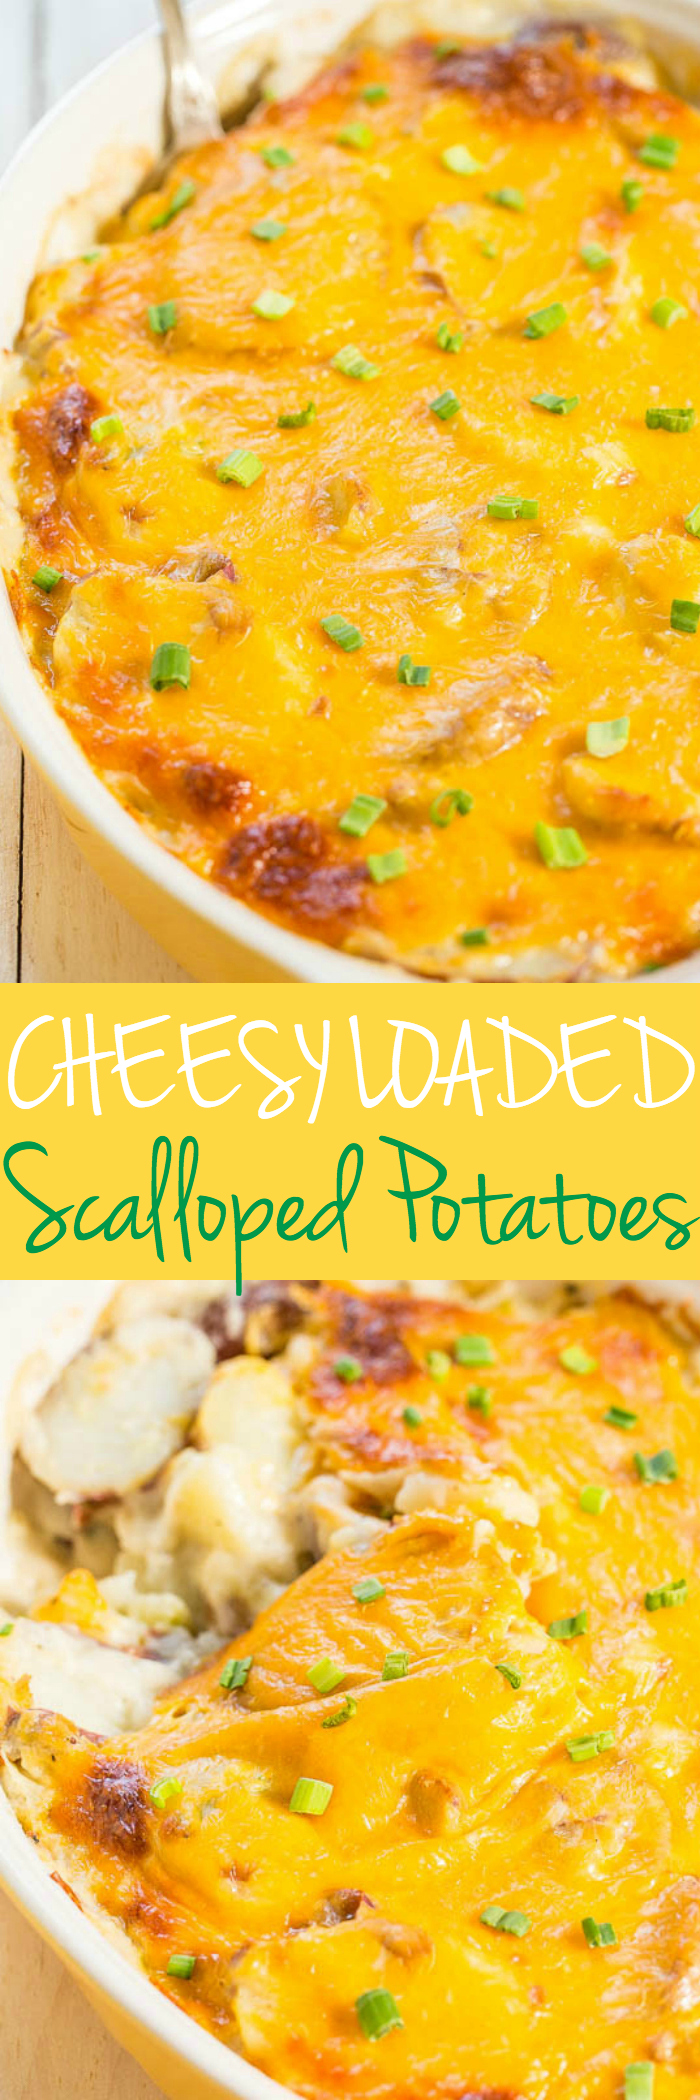 Cheesy Loaded Scalloped Potatoes - Baked with sour cream, green onions and topped with cheese! Easy comfort food that everyone loves! It'll be your new favorite recipe for scalloped potatoes!!